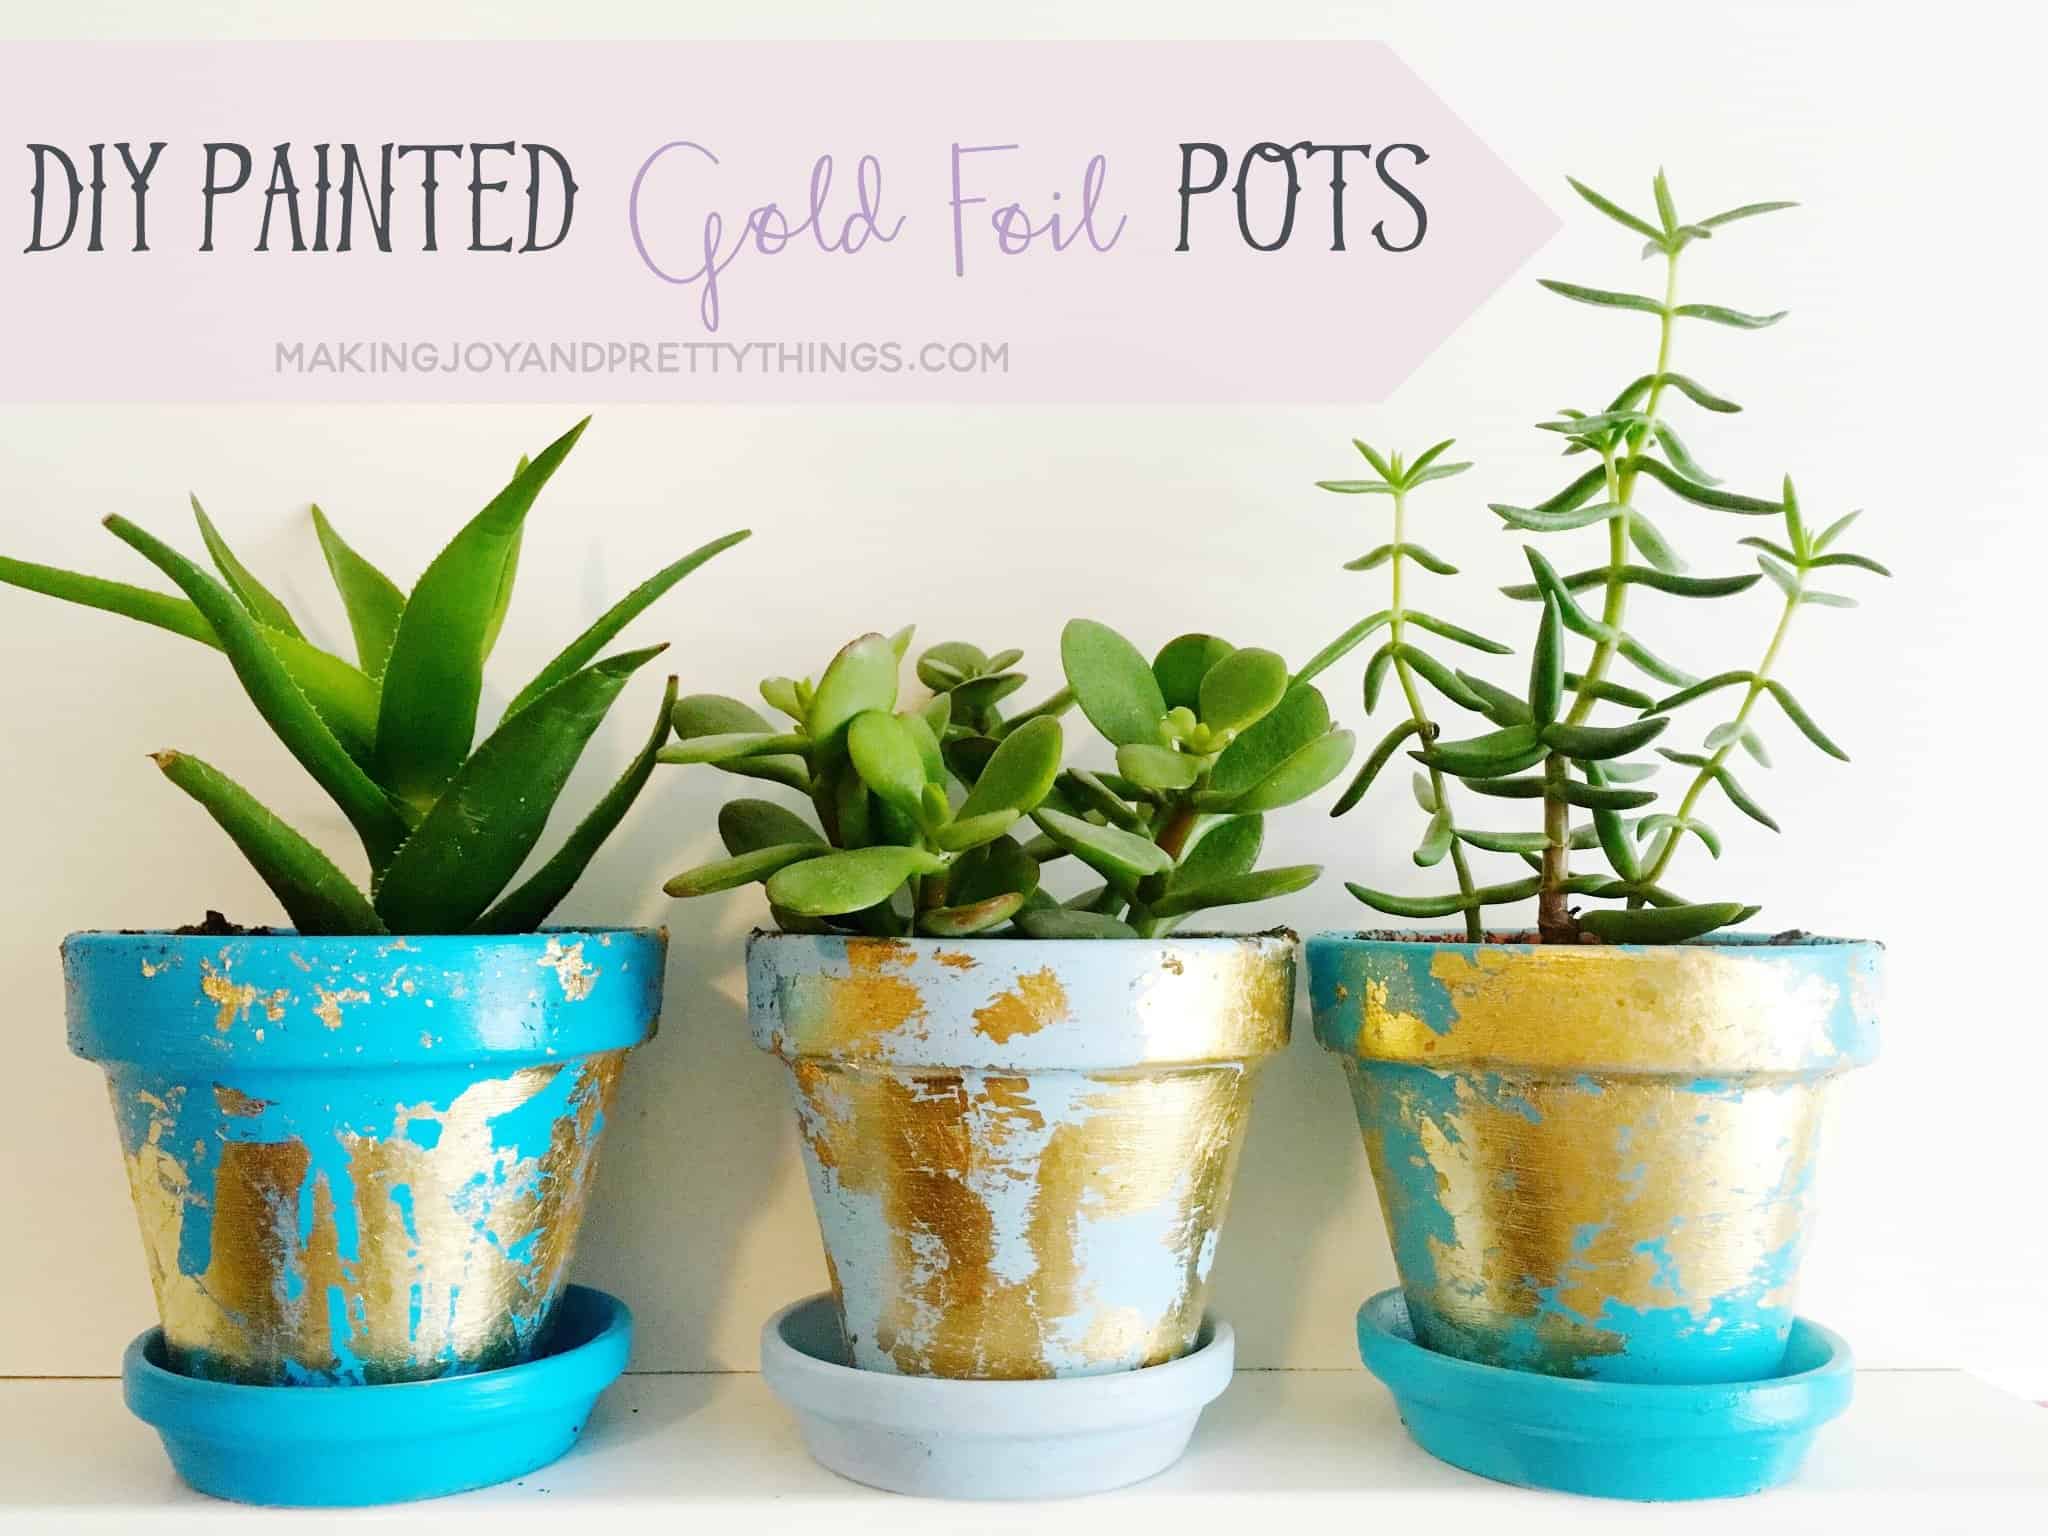 If you are looking for painted pot ideas look no further than these gold leaf planters to create a unique look with paint and gold foil